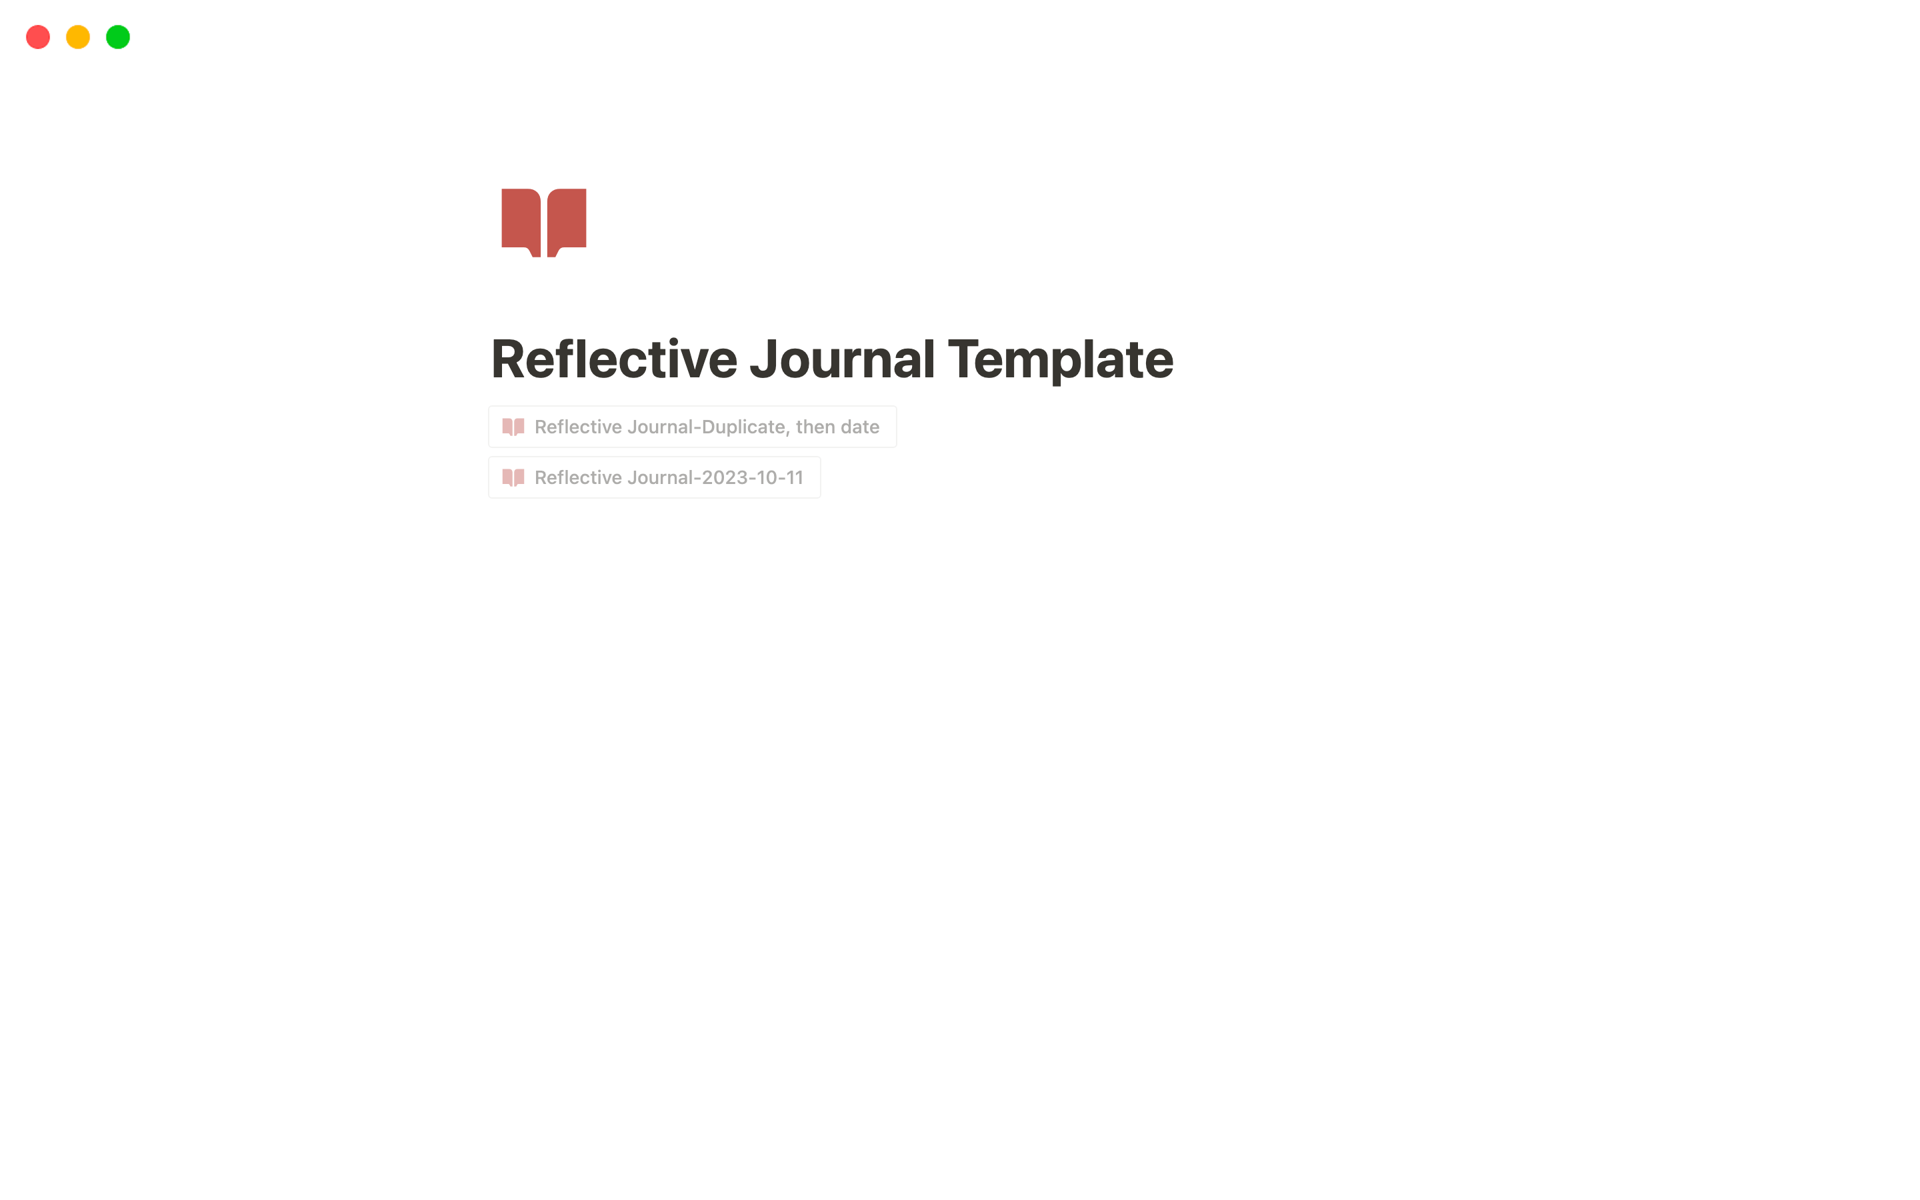 Reflective Journal for personal or academic use.